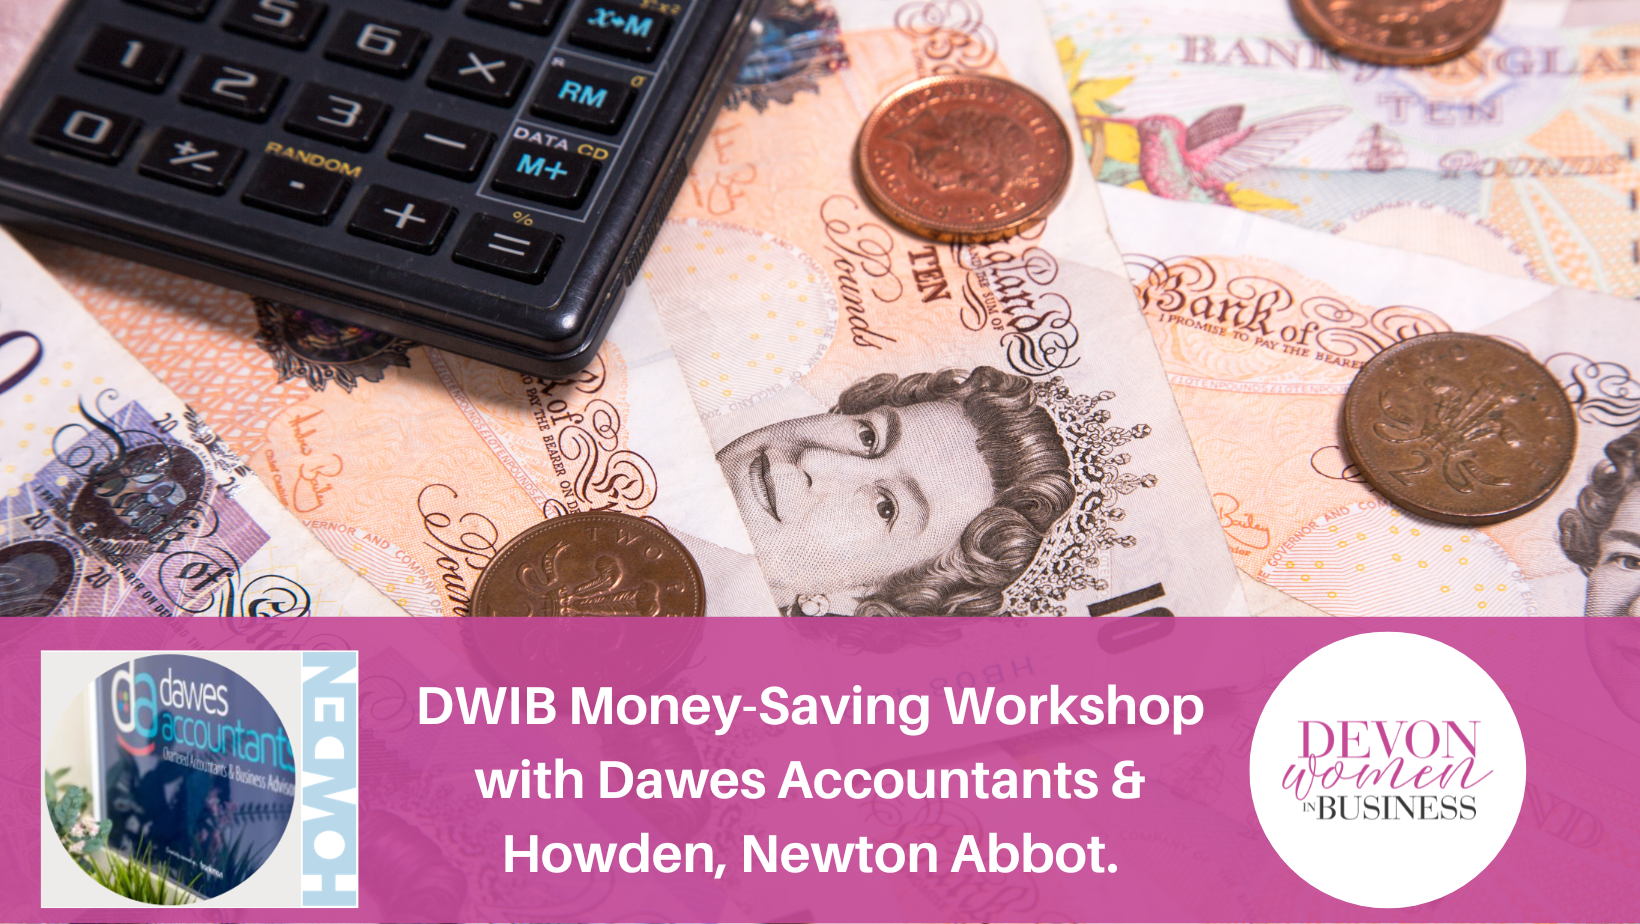 Calculator and cash including ten and twenty-pound notes and coins. Banner overlaid with the logos of Dawes Accountants, Howden and Devon Women in Business. Text: DWIB Money-Saving Workshop with Dawes Accountants and Howden, Newton Abbot.